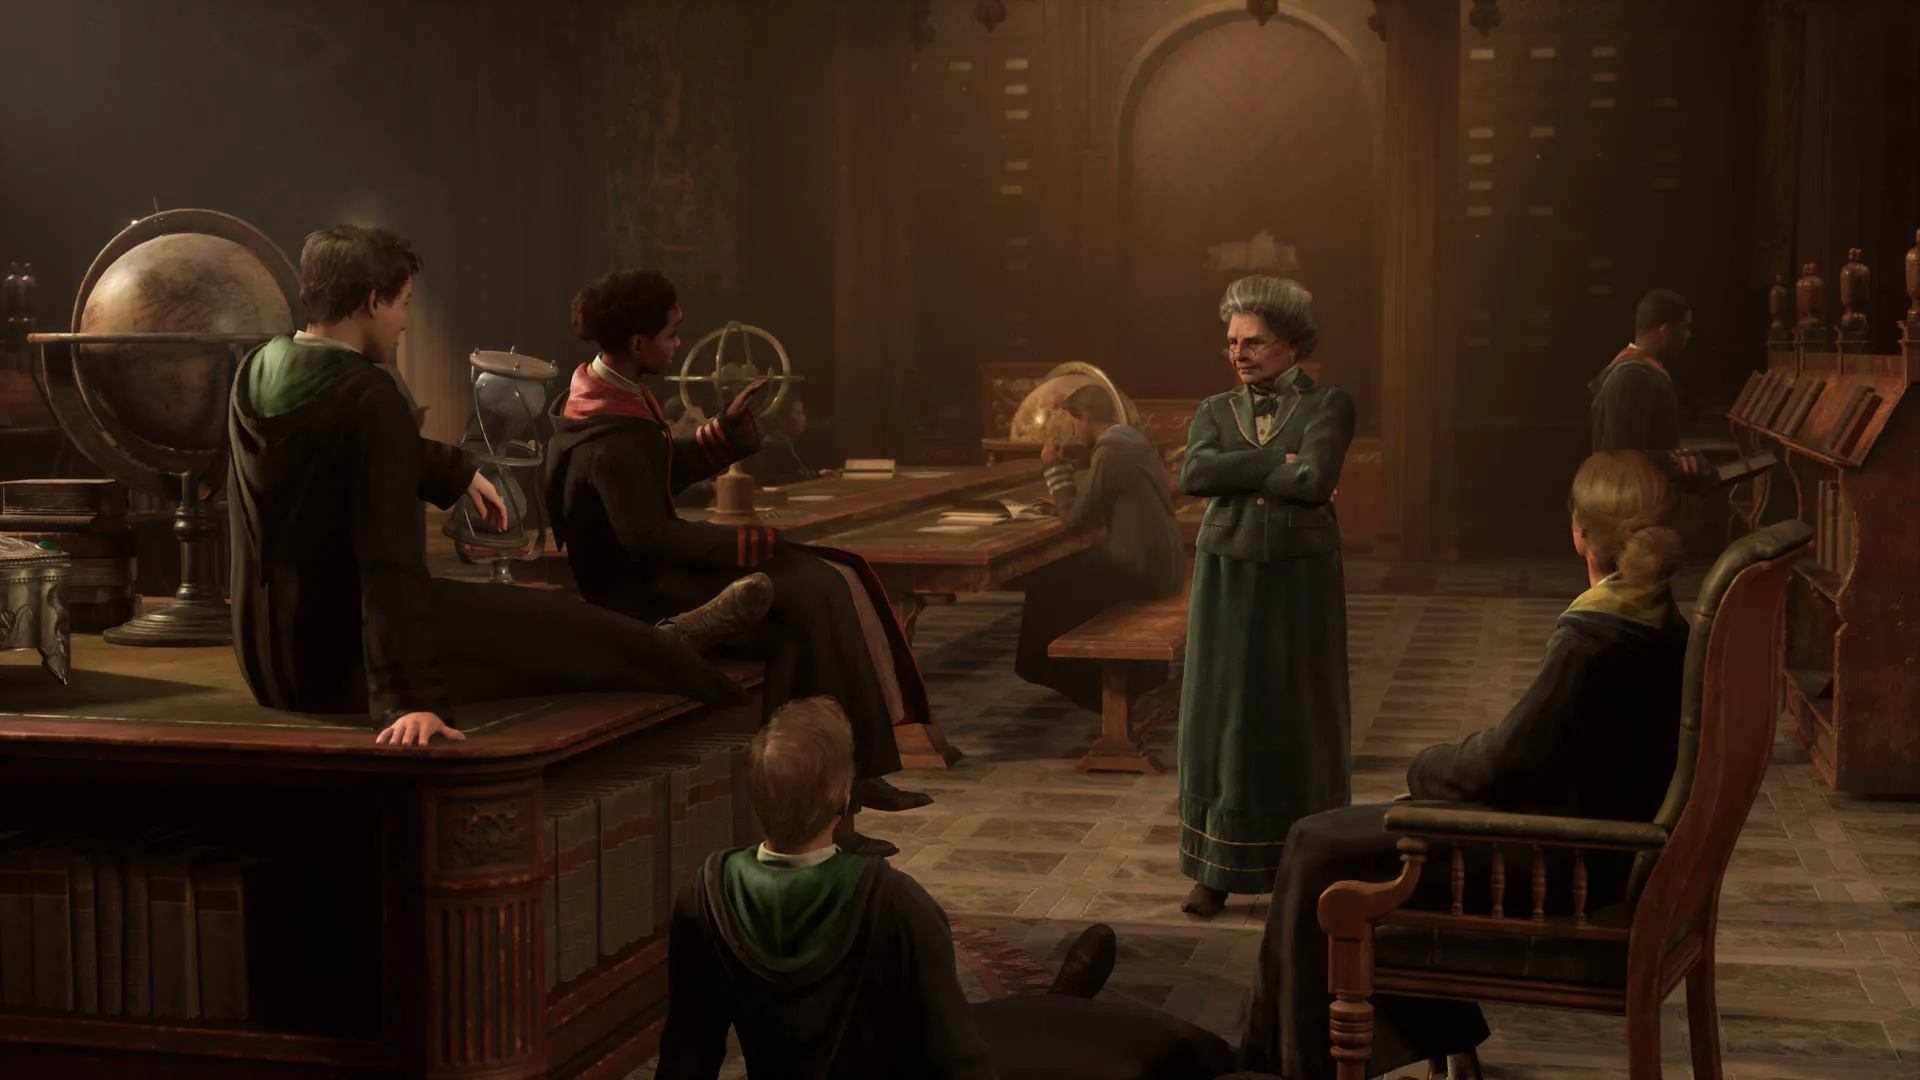 Hogwarts Legacy Digital Deluxe Edition grants 72 hours early access